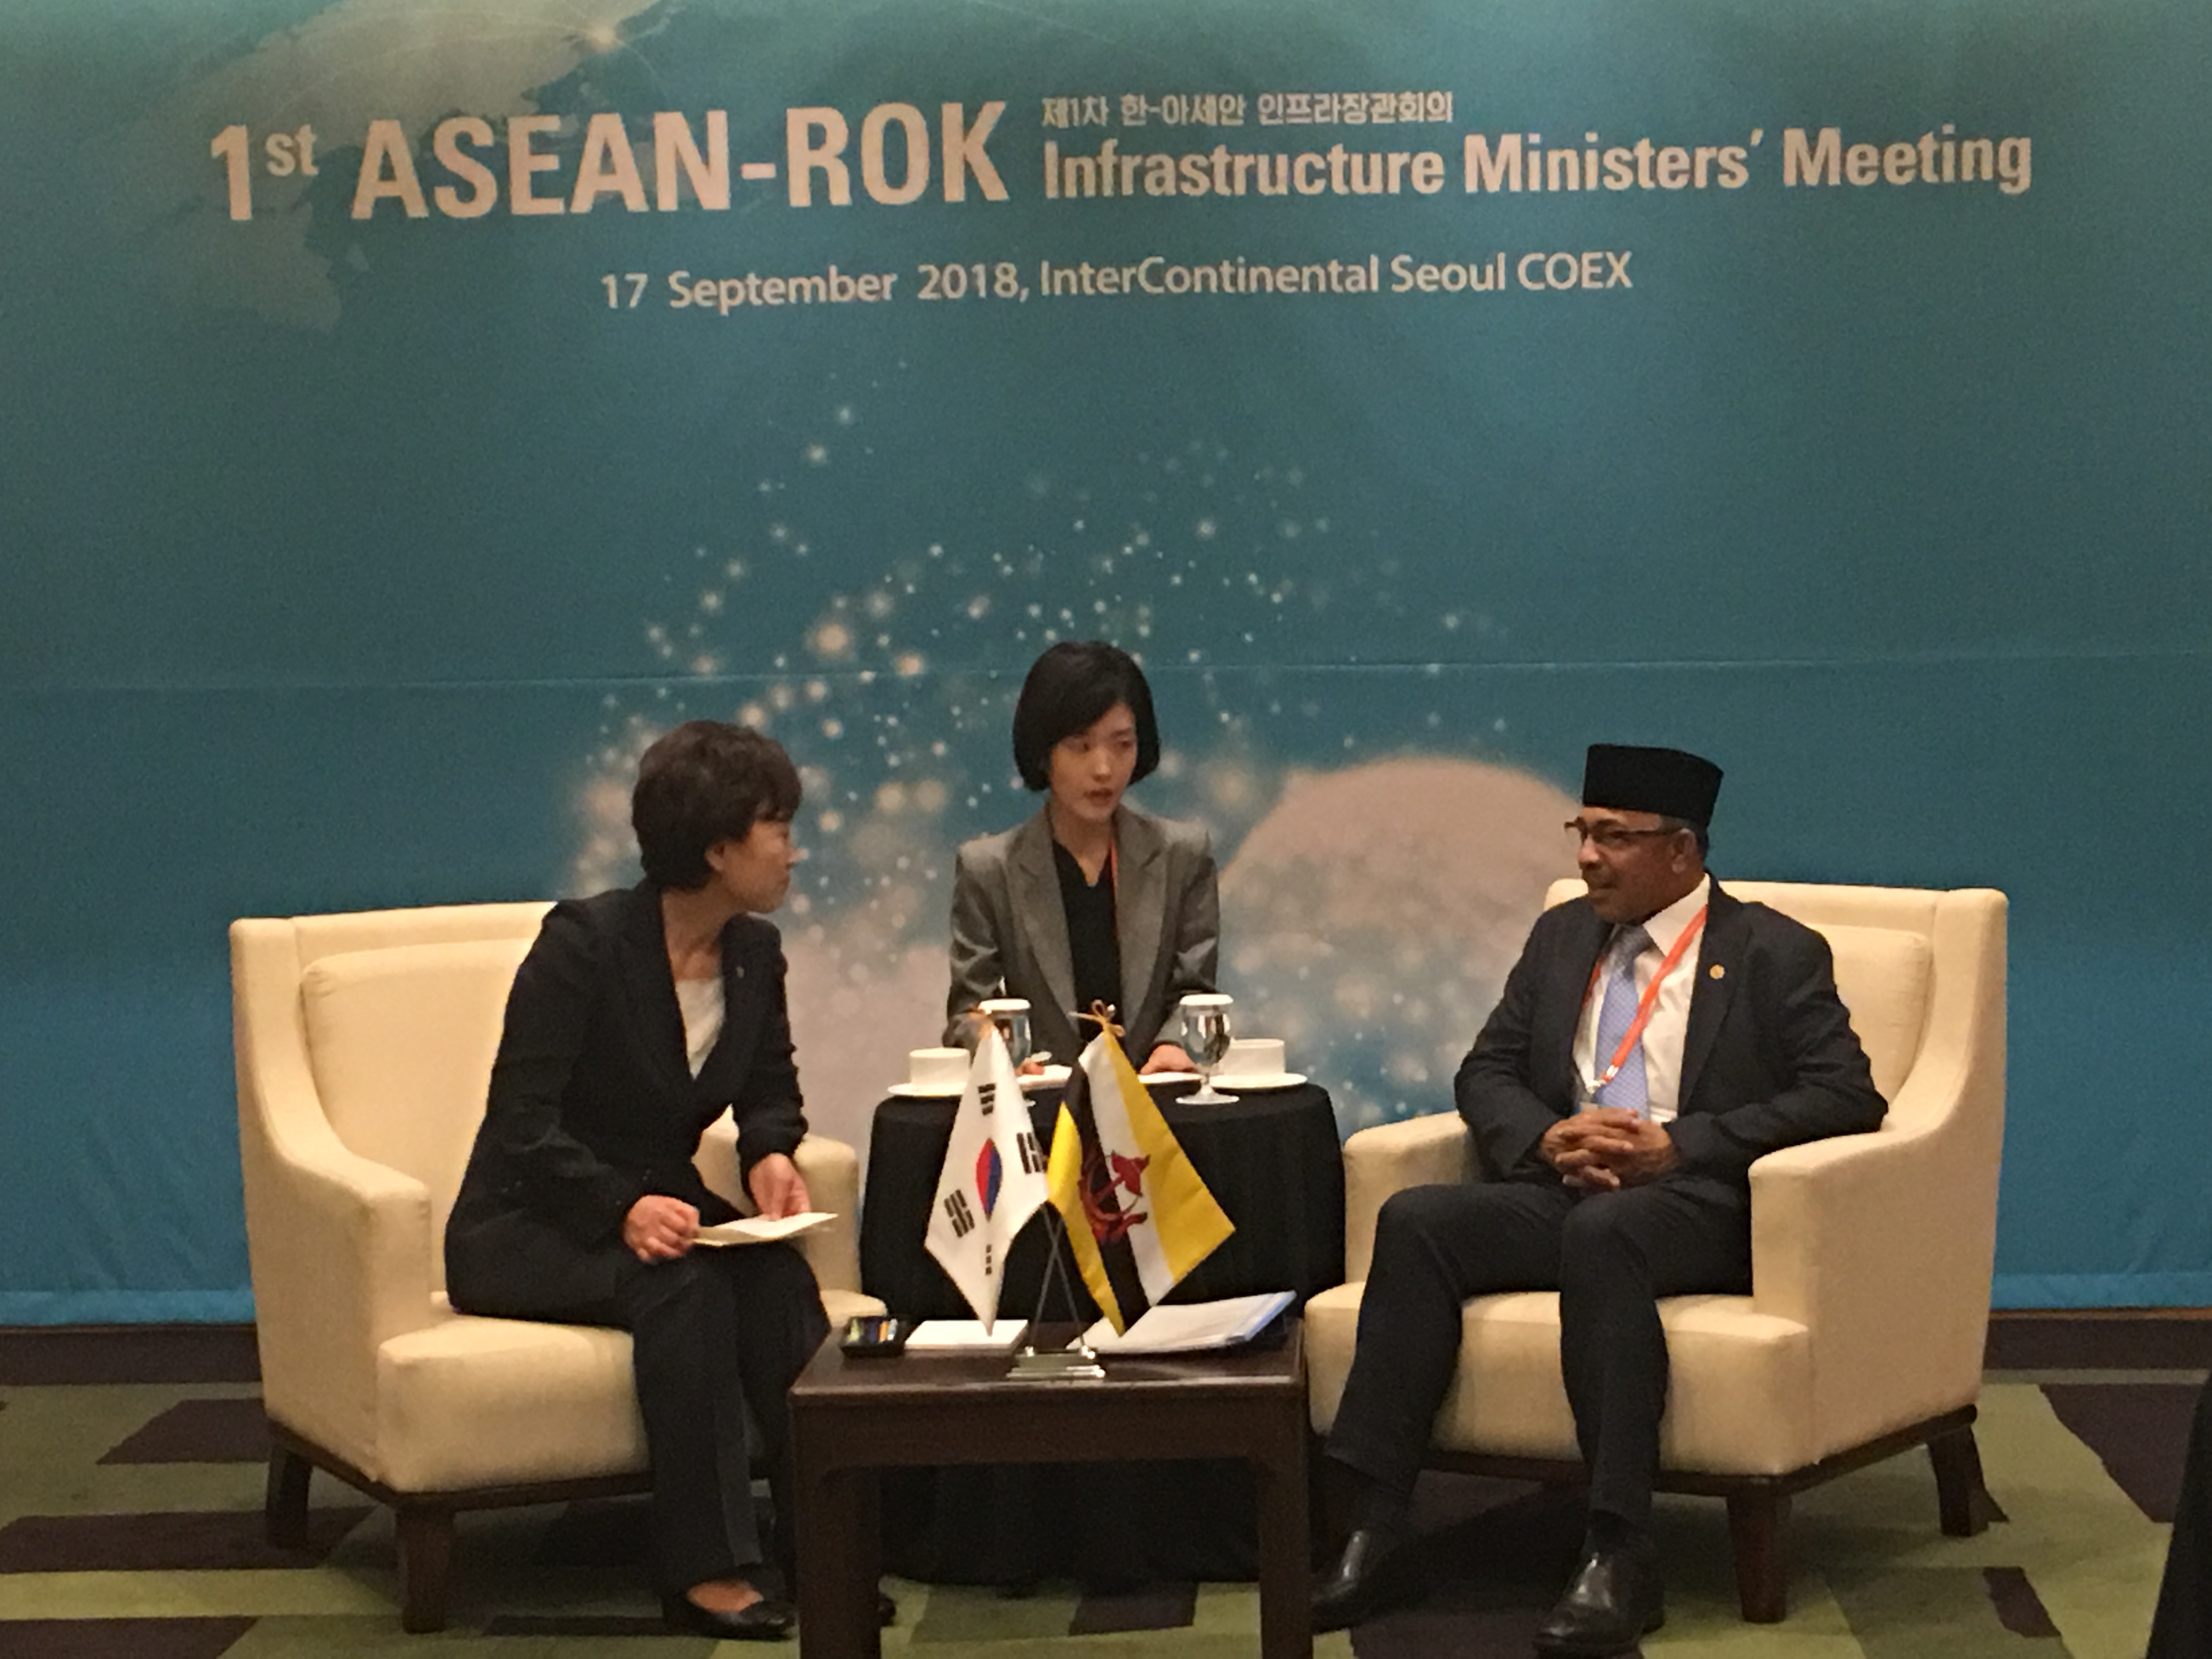 2_1st ASEAN-ROK INFRASTRUCTURE MINISTERS' MEETING.png